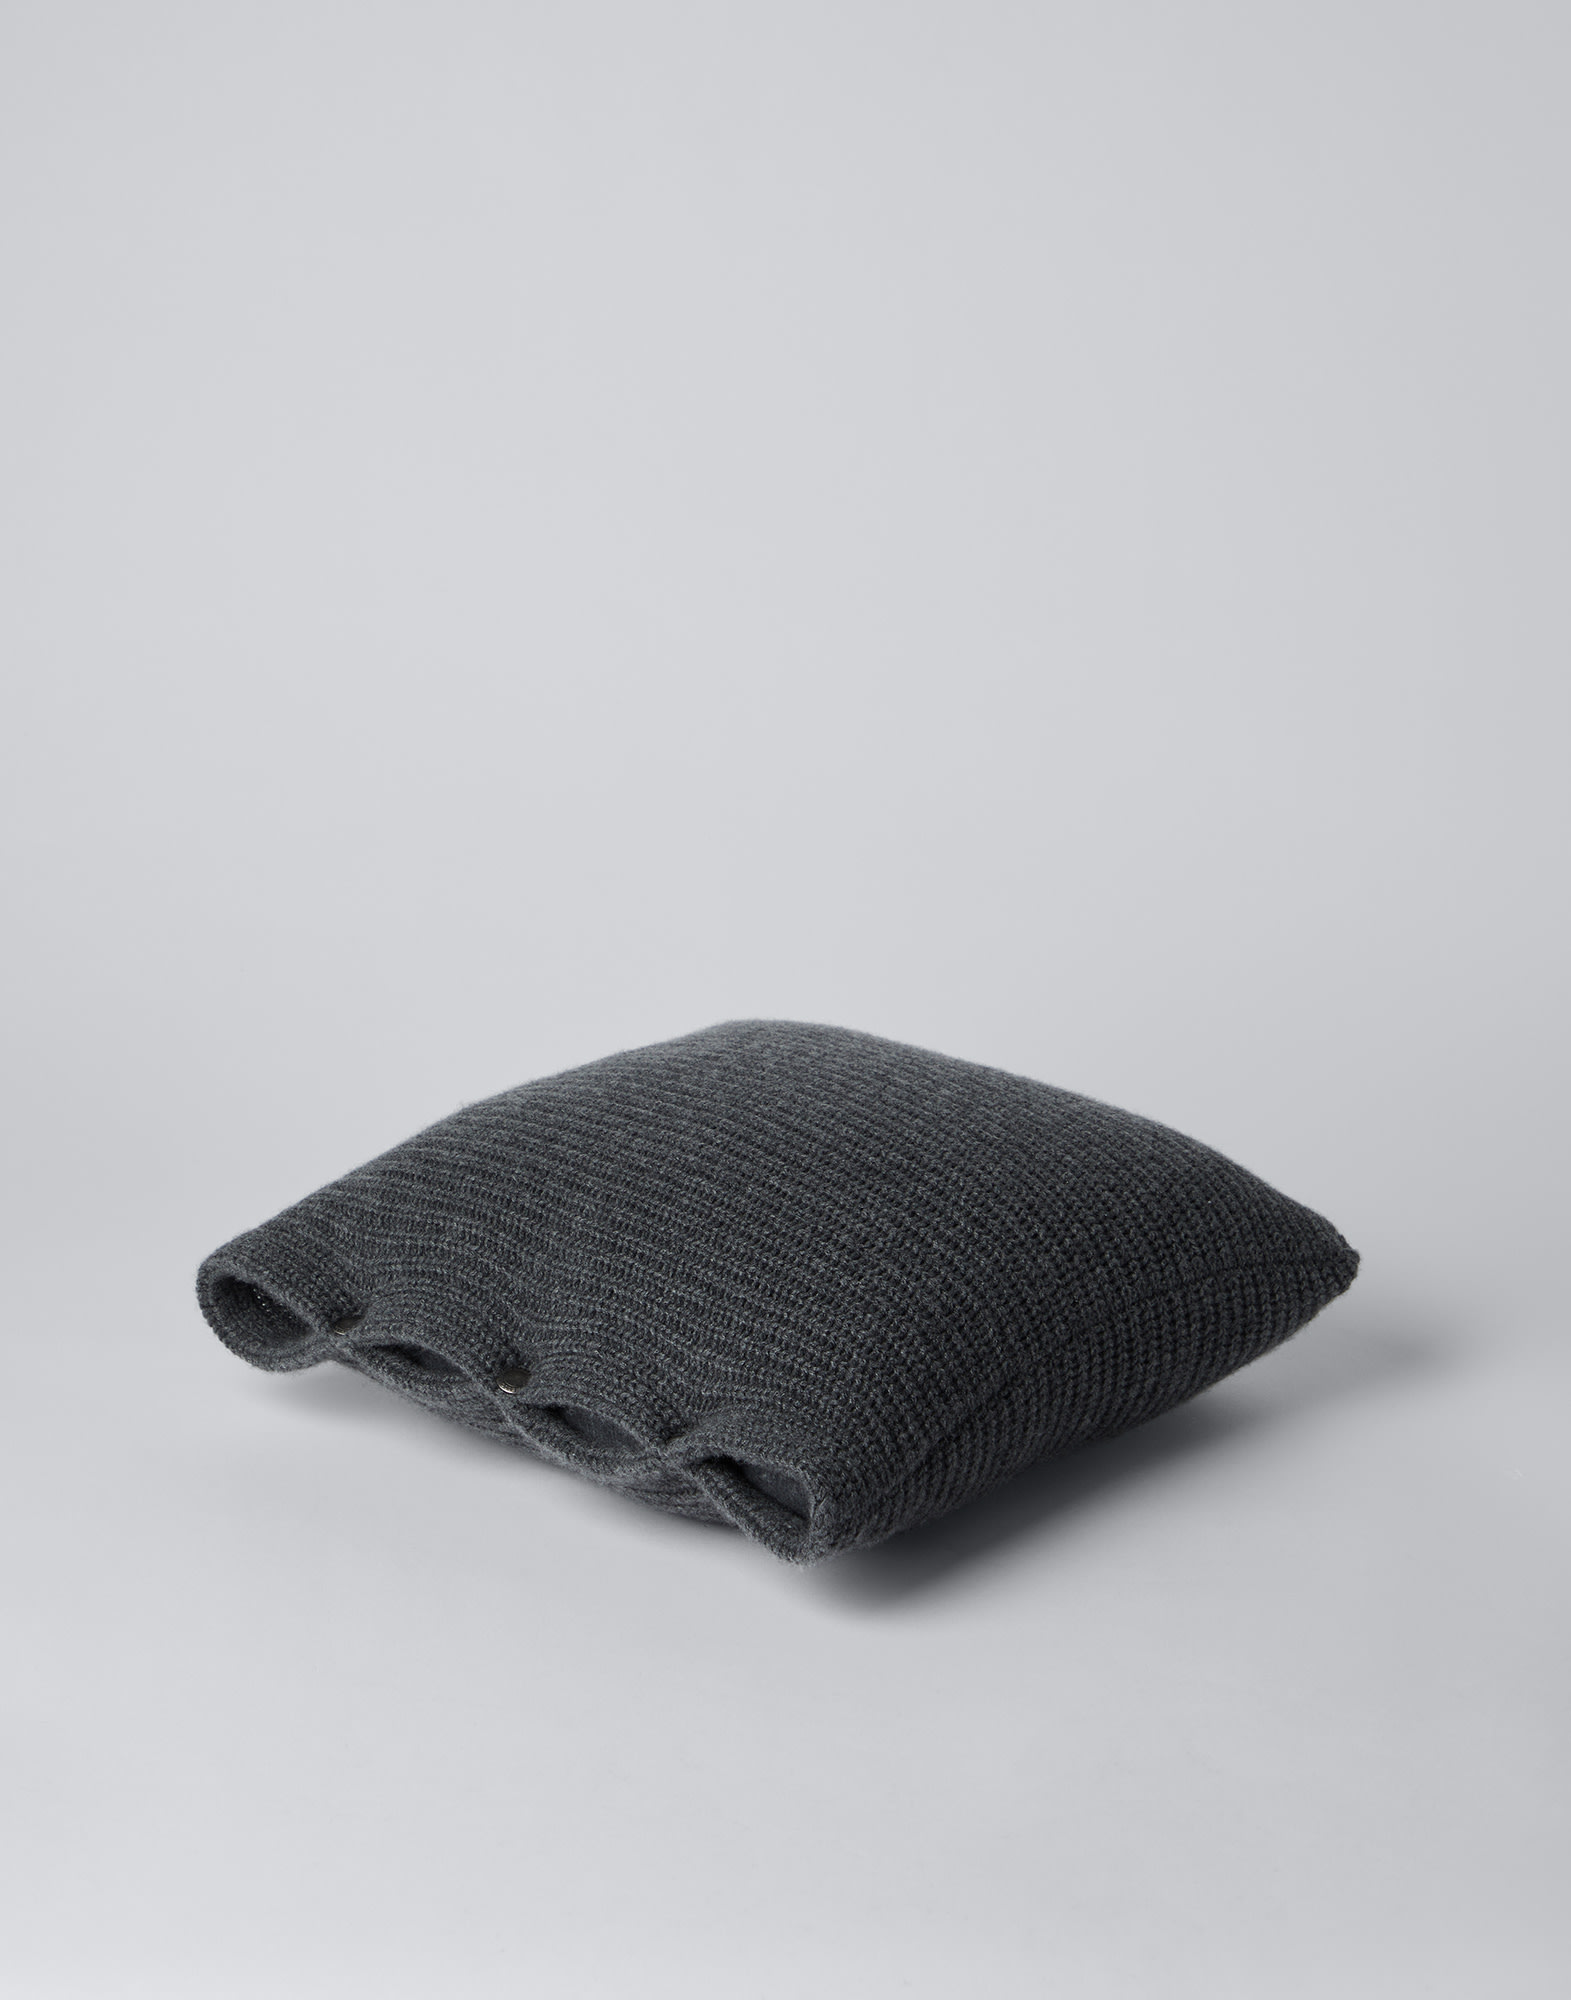 Cushion with cover